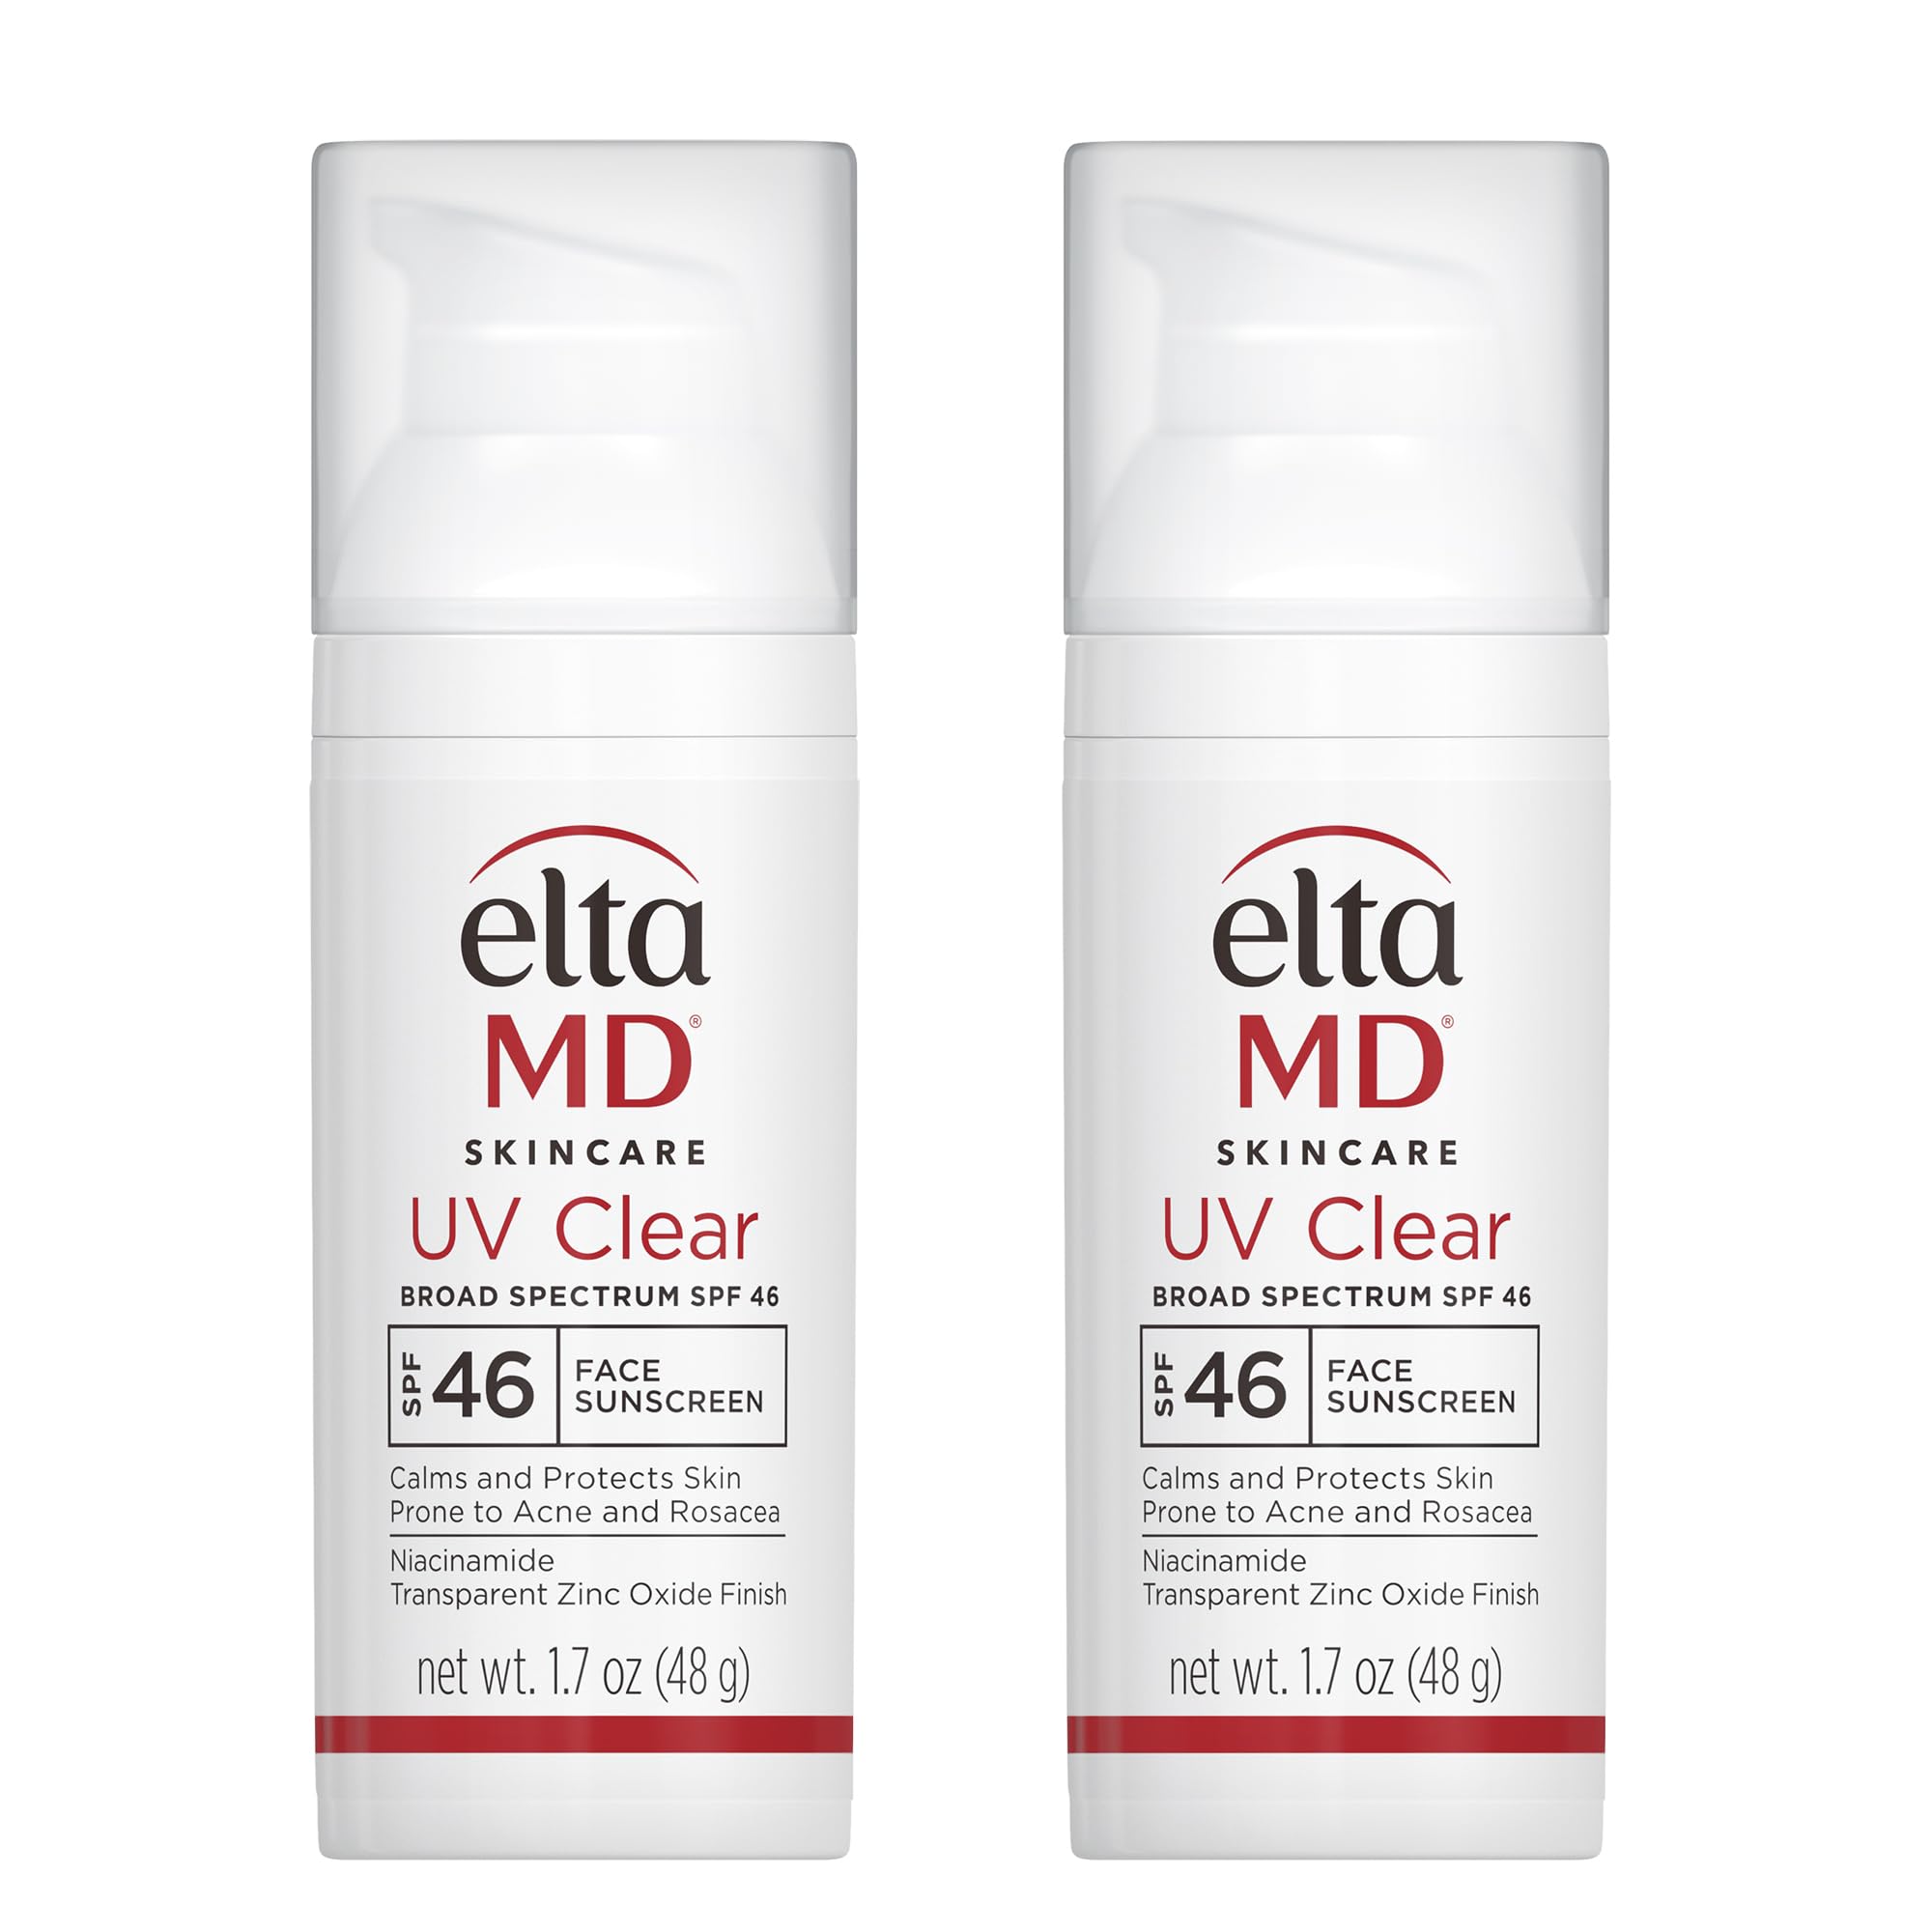 EltaMD UV Clear Face Sunscreen, SPF 46 Oil Free Sunscreen with Zinc Oxide, Protects and Calms Sensitive Skin and Acne-Prone Skin, Lightweight, Silky, Dermatologist Recommended, (2 Pack)